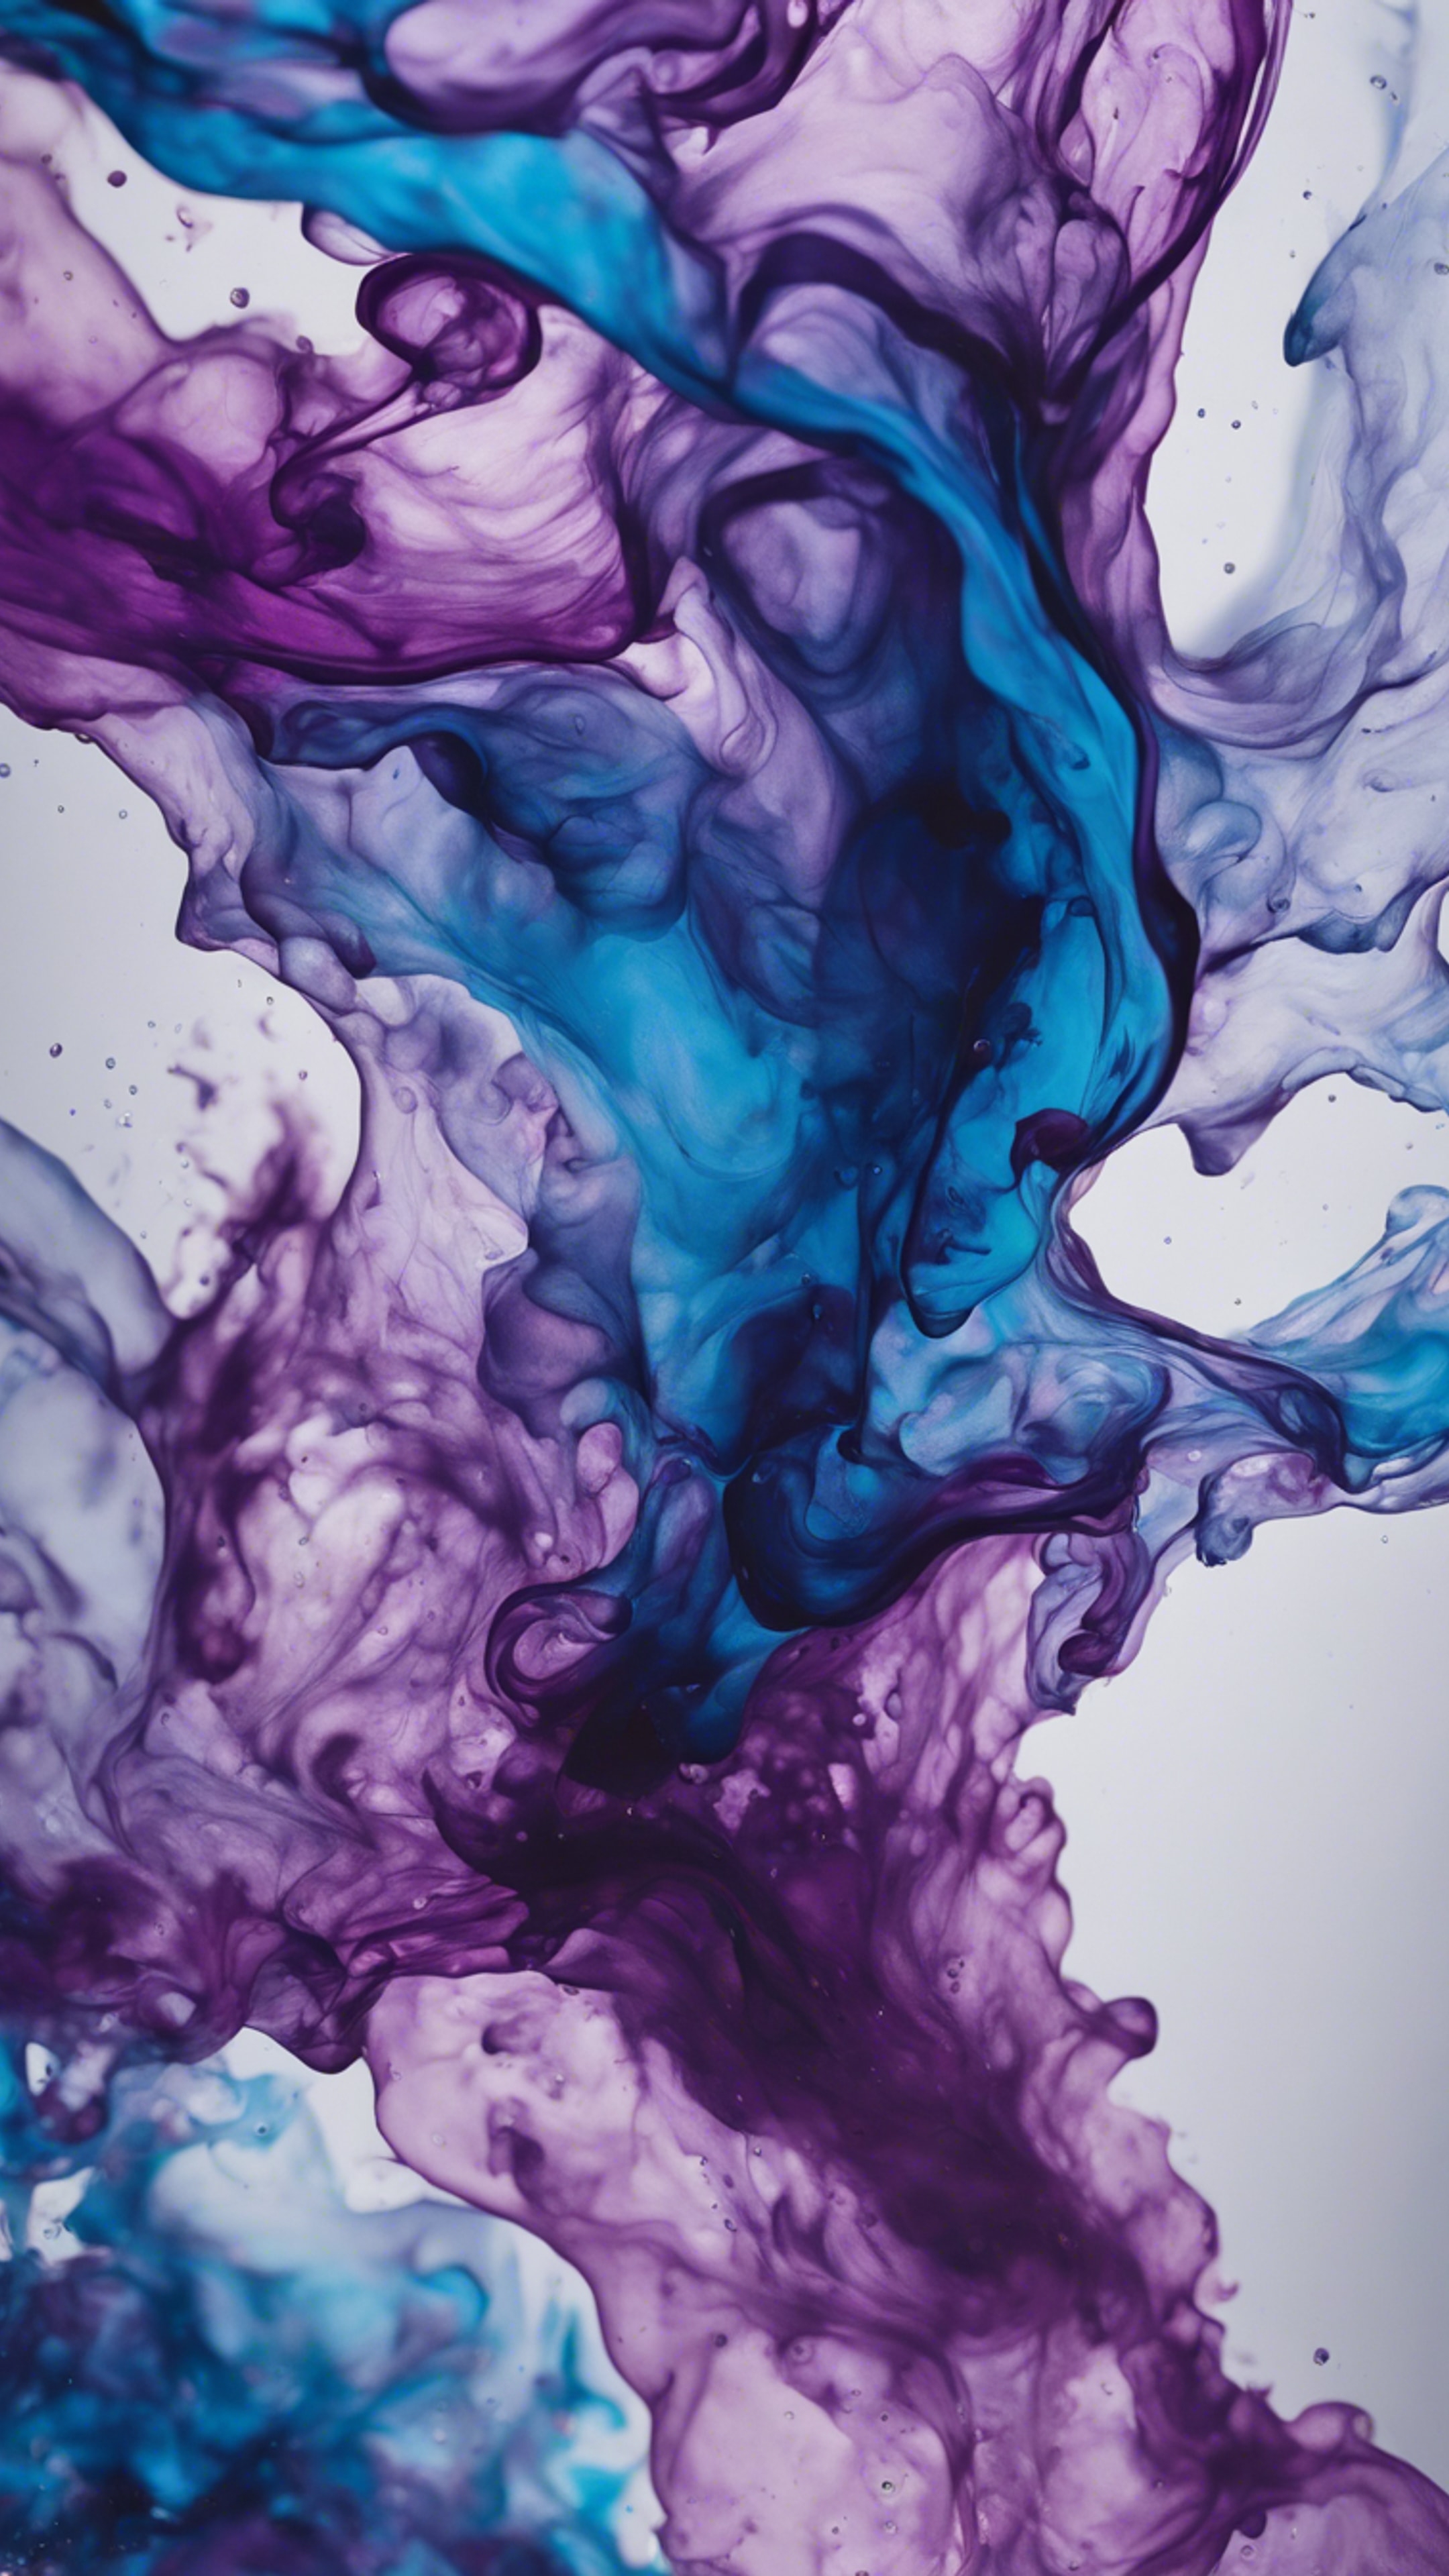 An abstract fluid art piece with swirling waves of ink in hues of cool blue and passionate purple. טפט[1f0e9ffb93e84991a030]